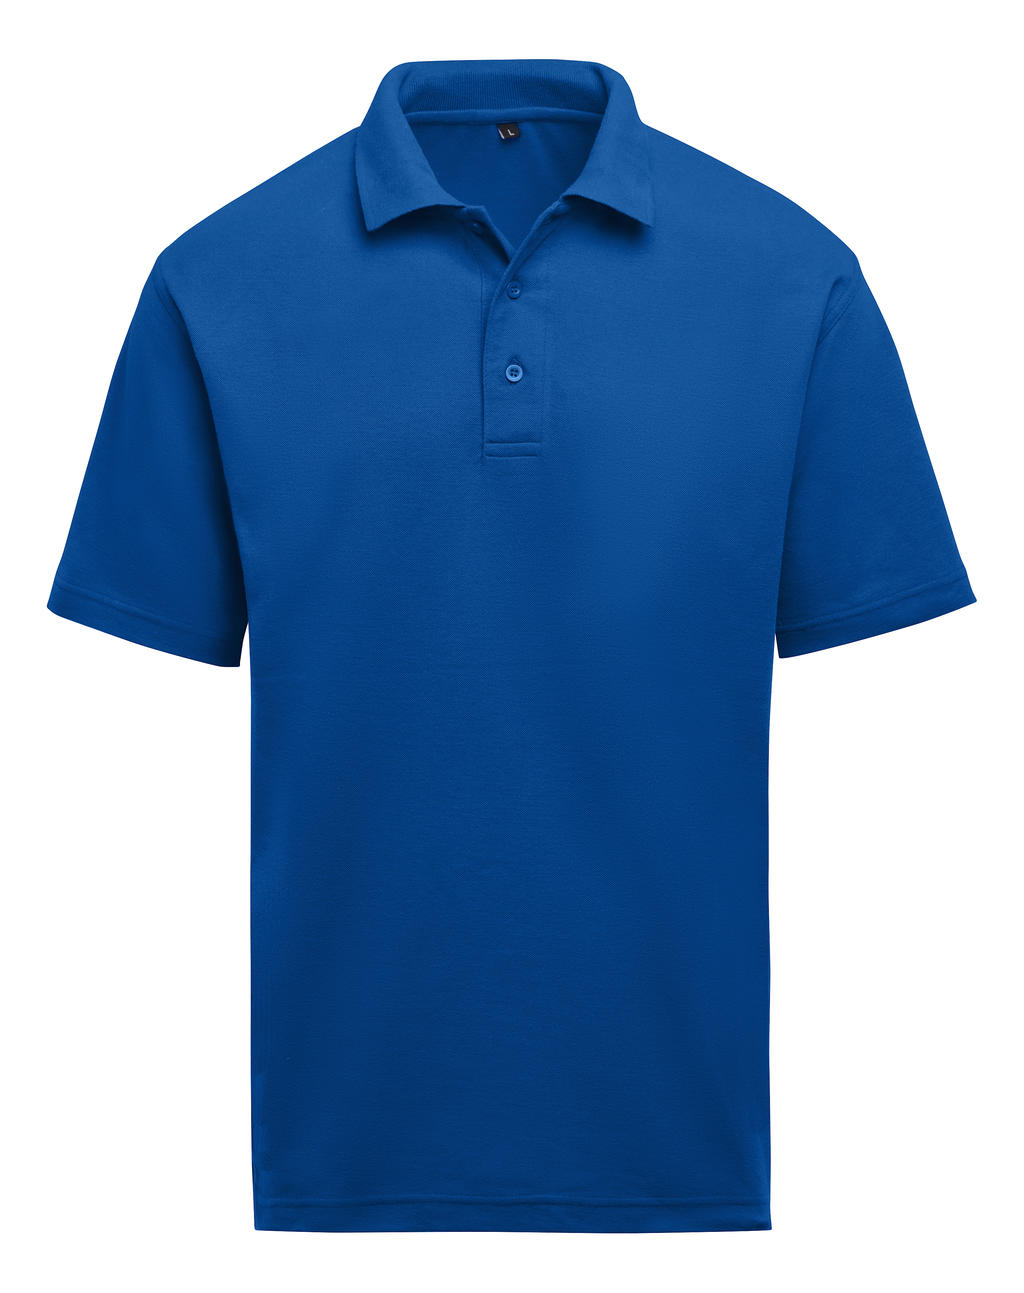  Unisex Polo in Farbe Royal